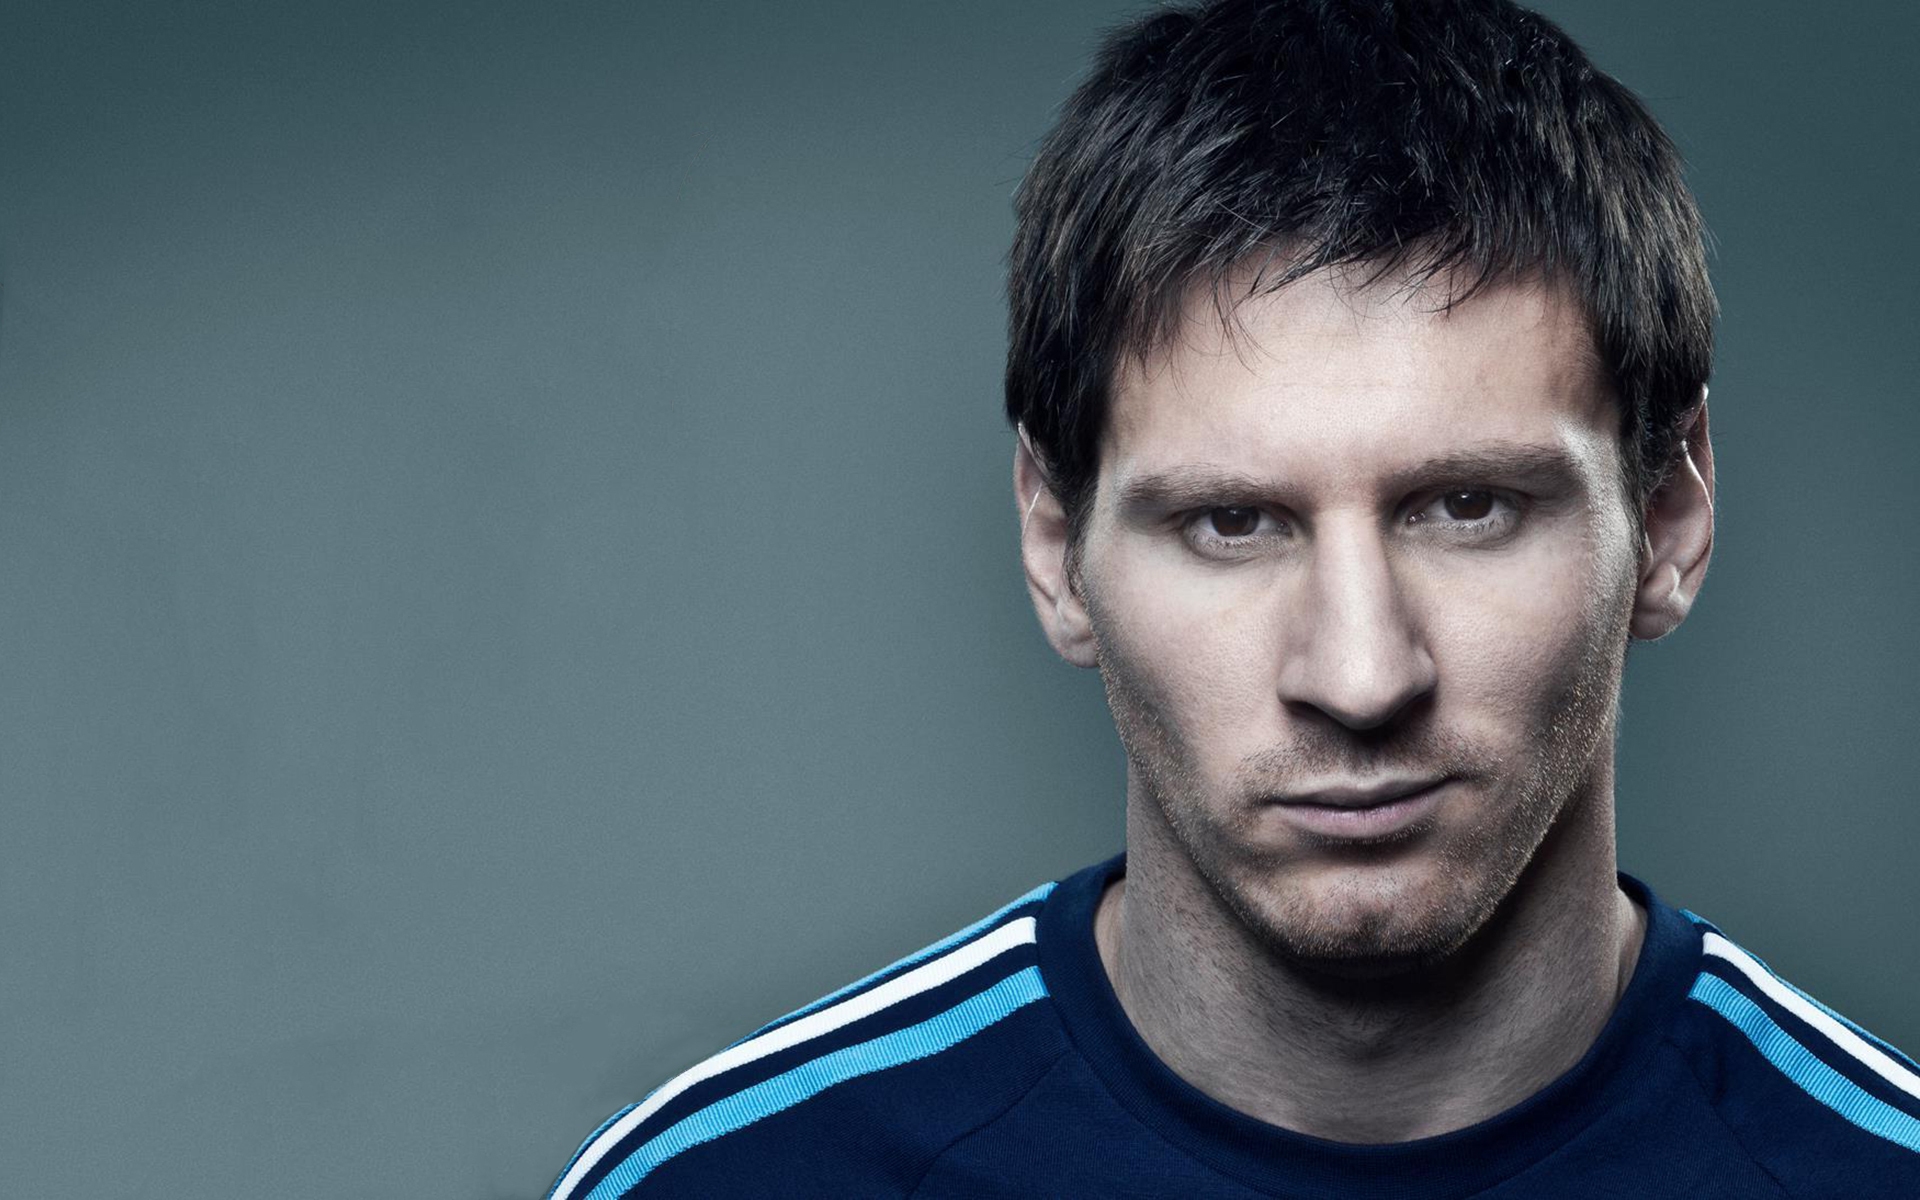 Messi Pose for 1920 x 1200 widescreen resolution